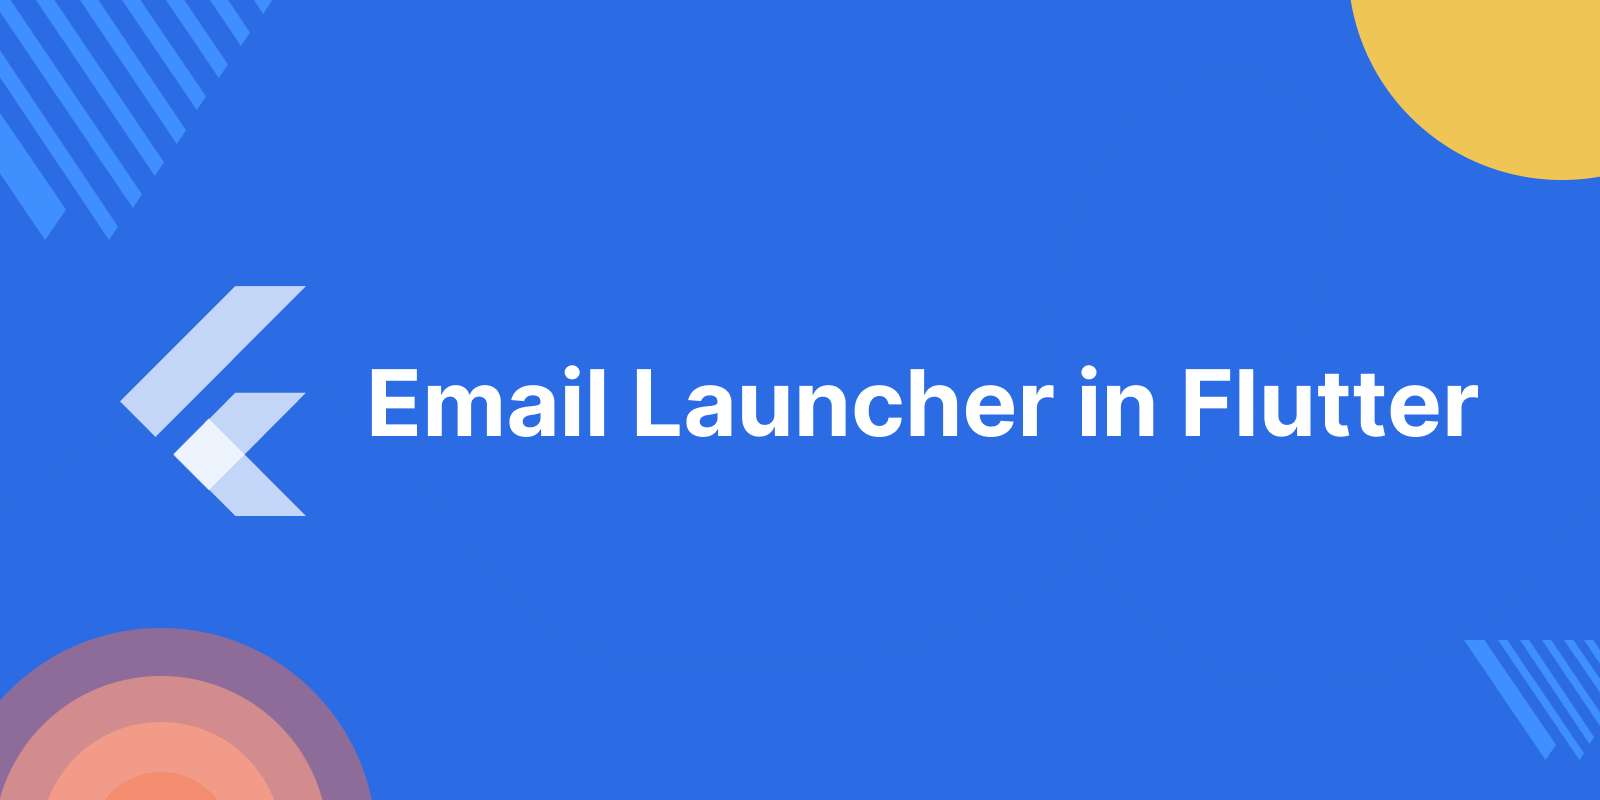 Email Launcher in Flutter
